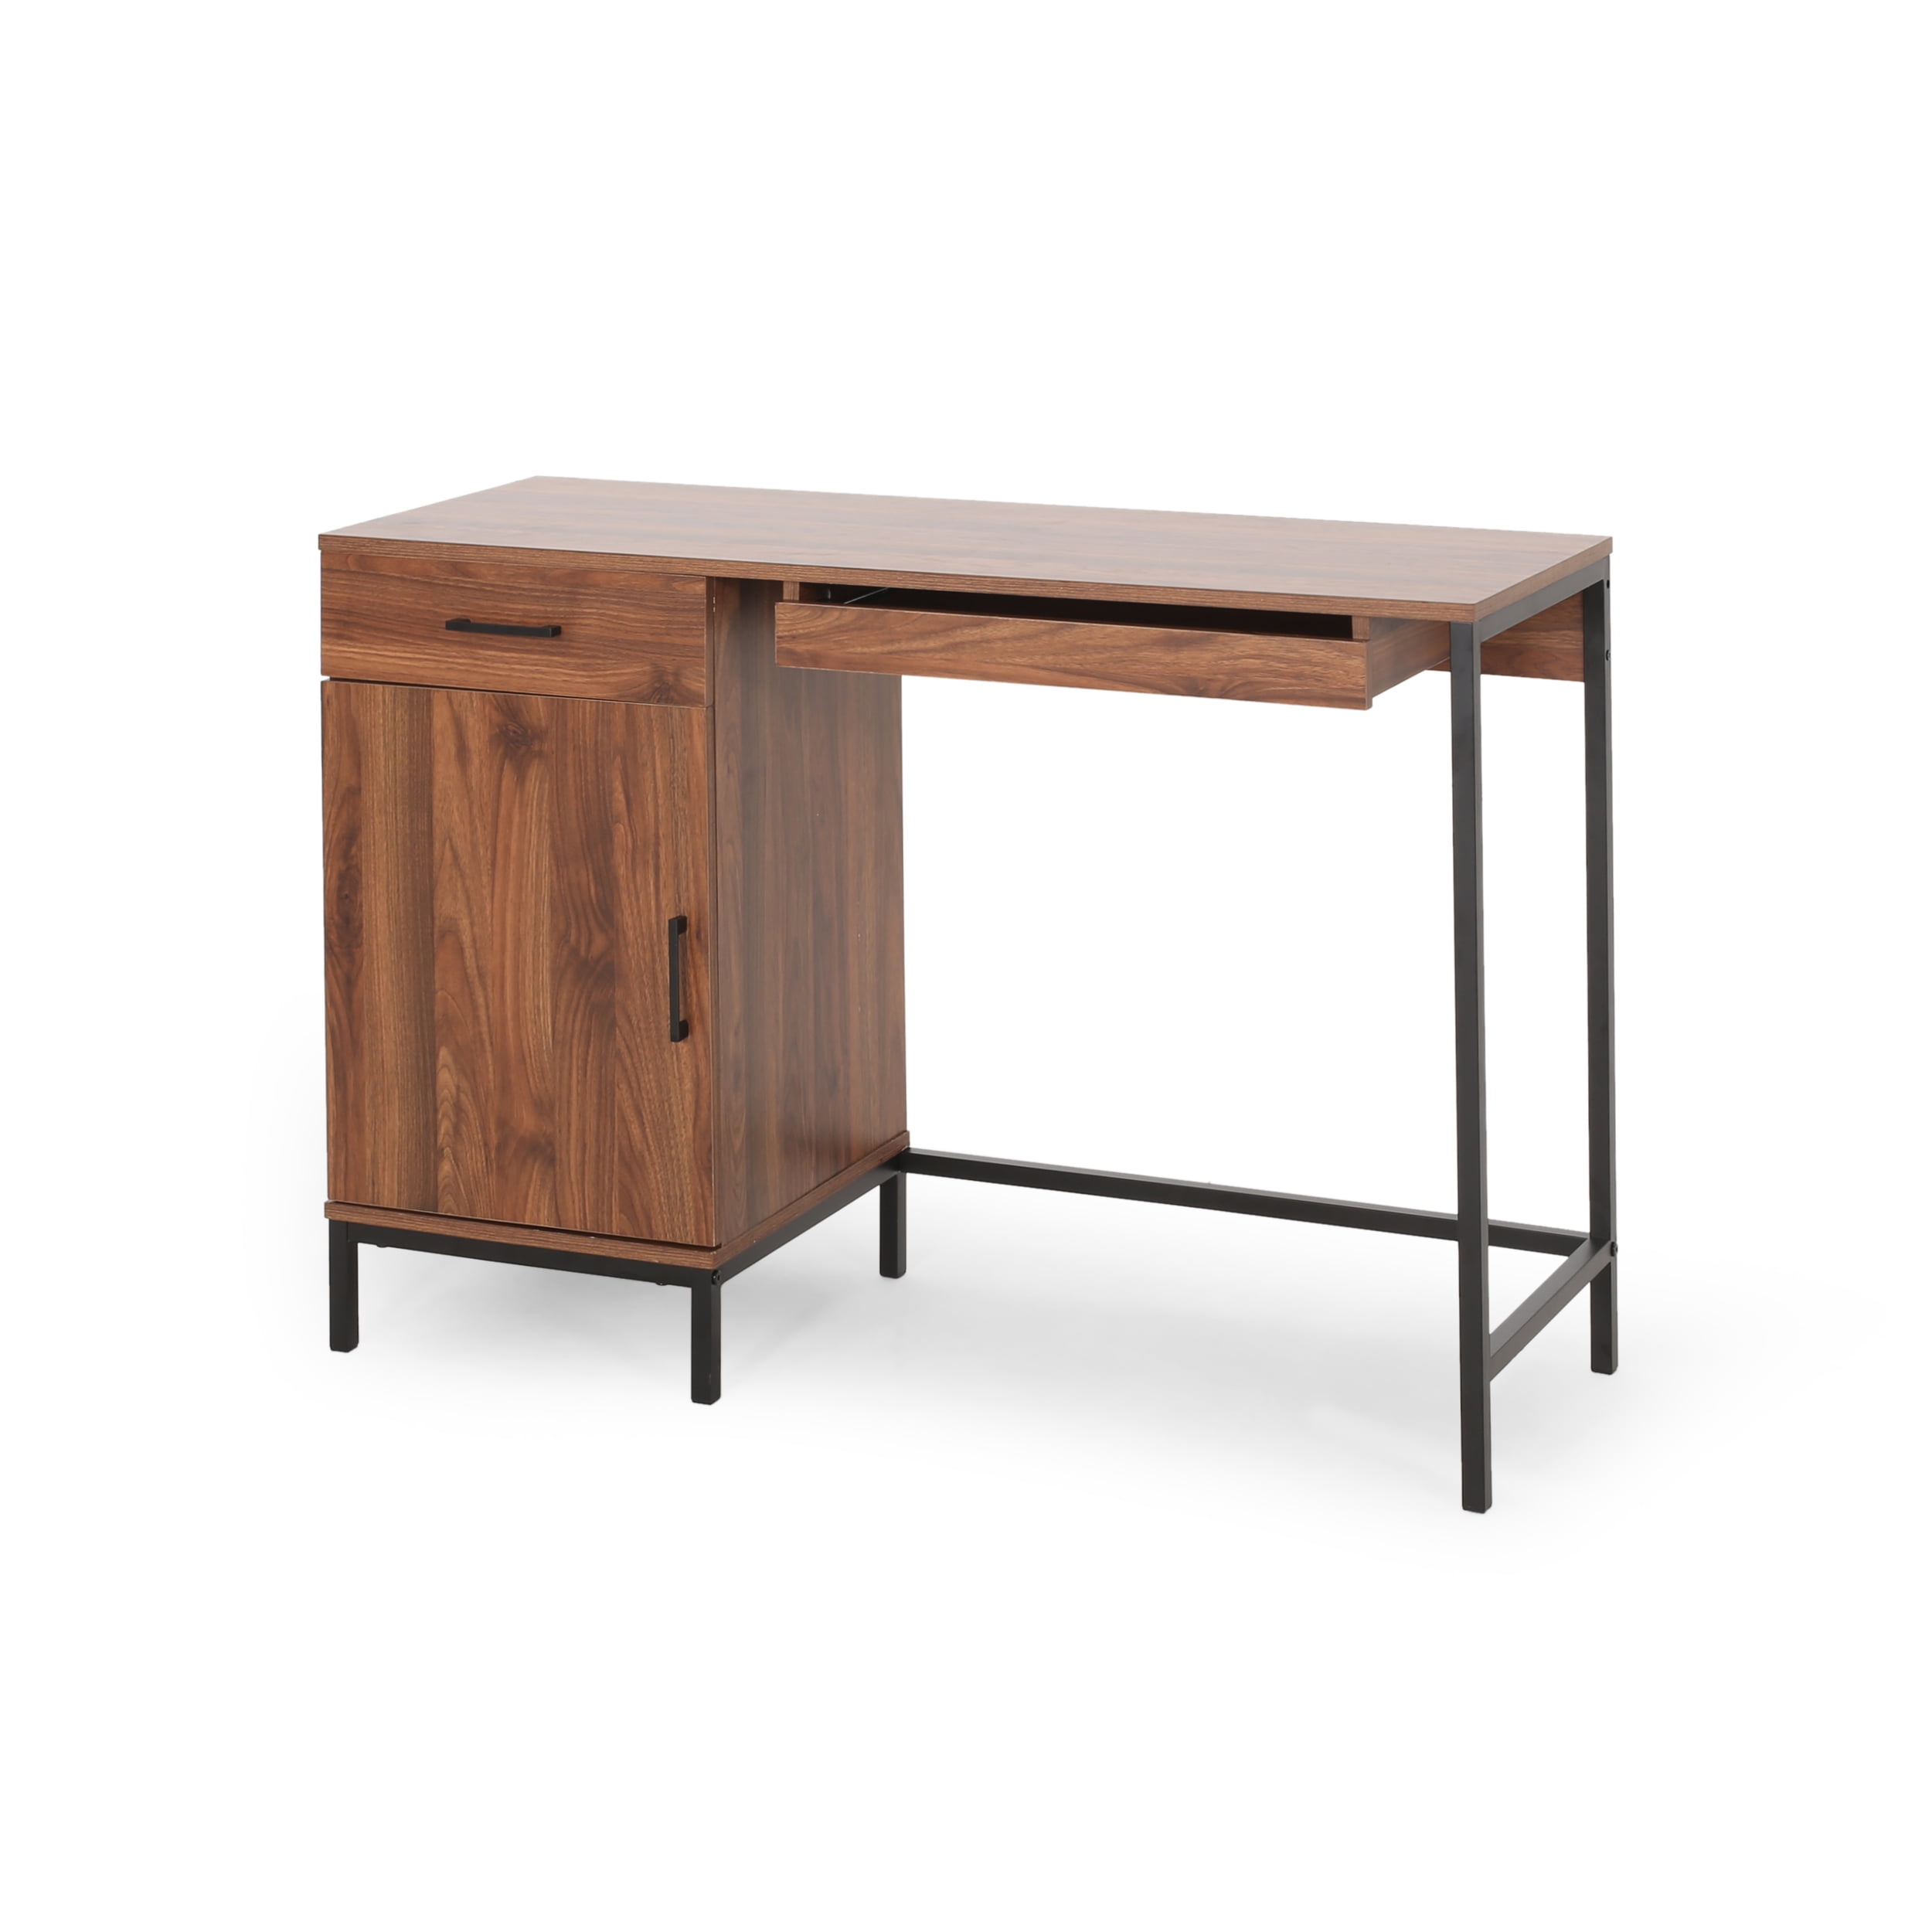 Buy Athos Computer Table in Walnut Finish at 38% OFF by Woodbuzz